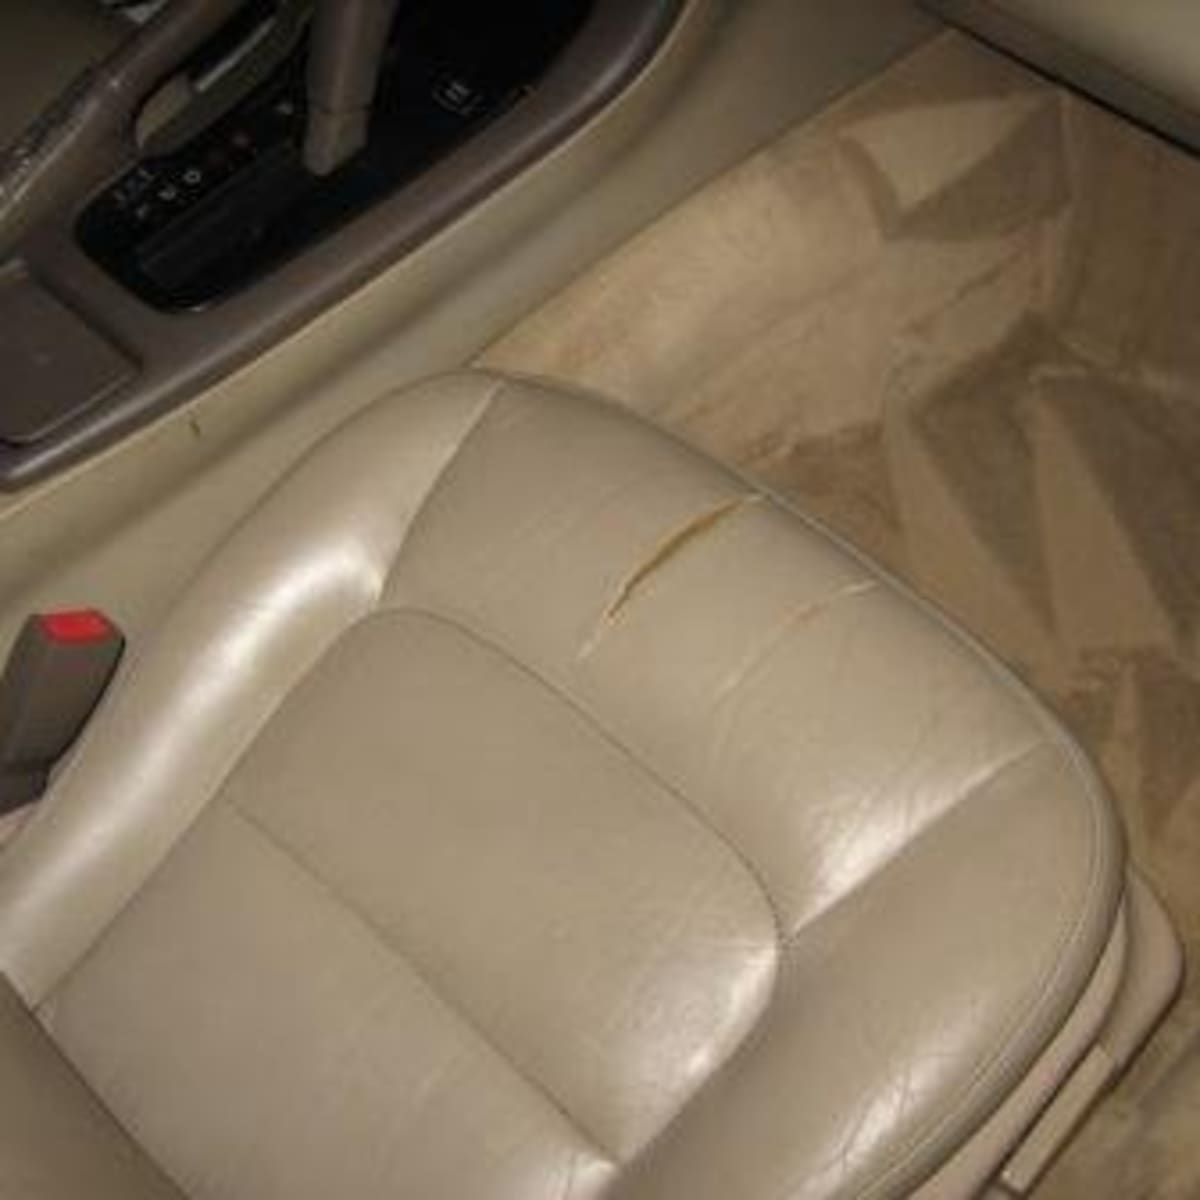 Repair Leather And Vinyl Car Seats, How Much Does It Cost To Repair A Leather Chair